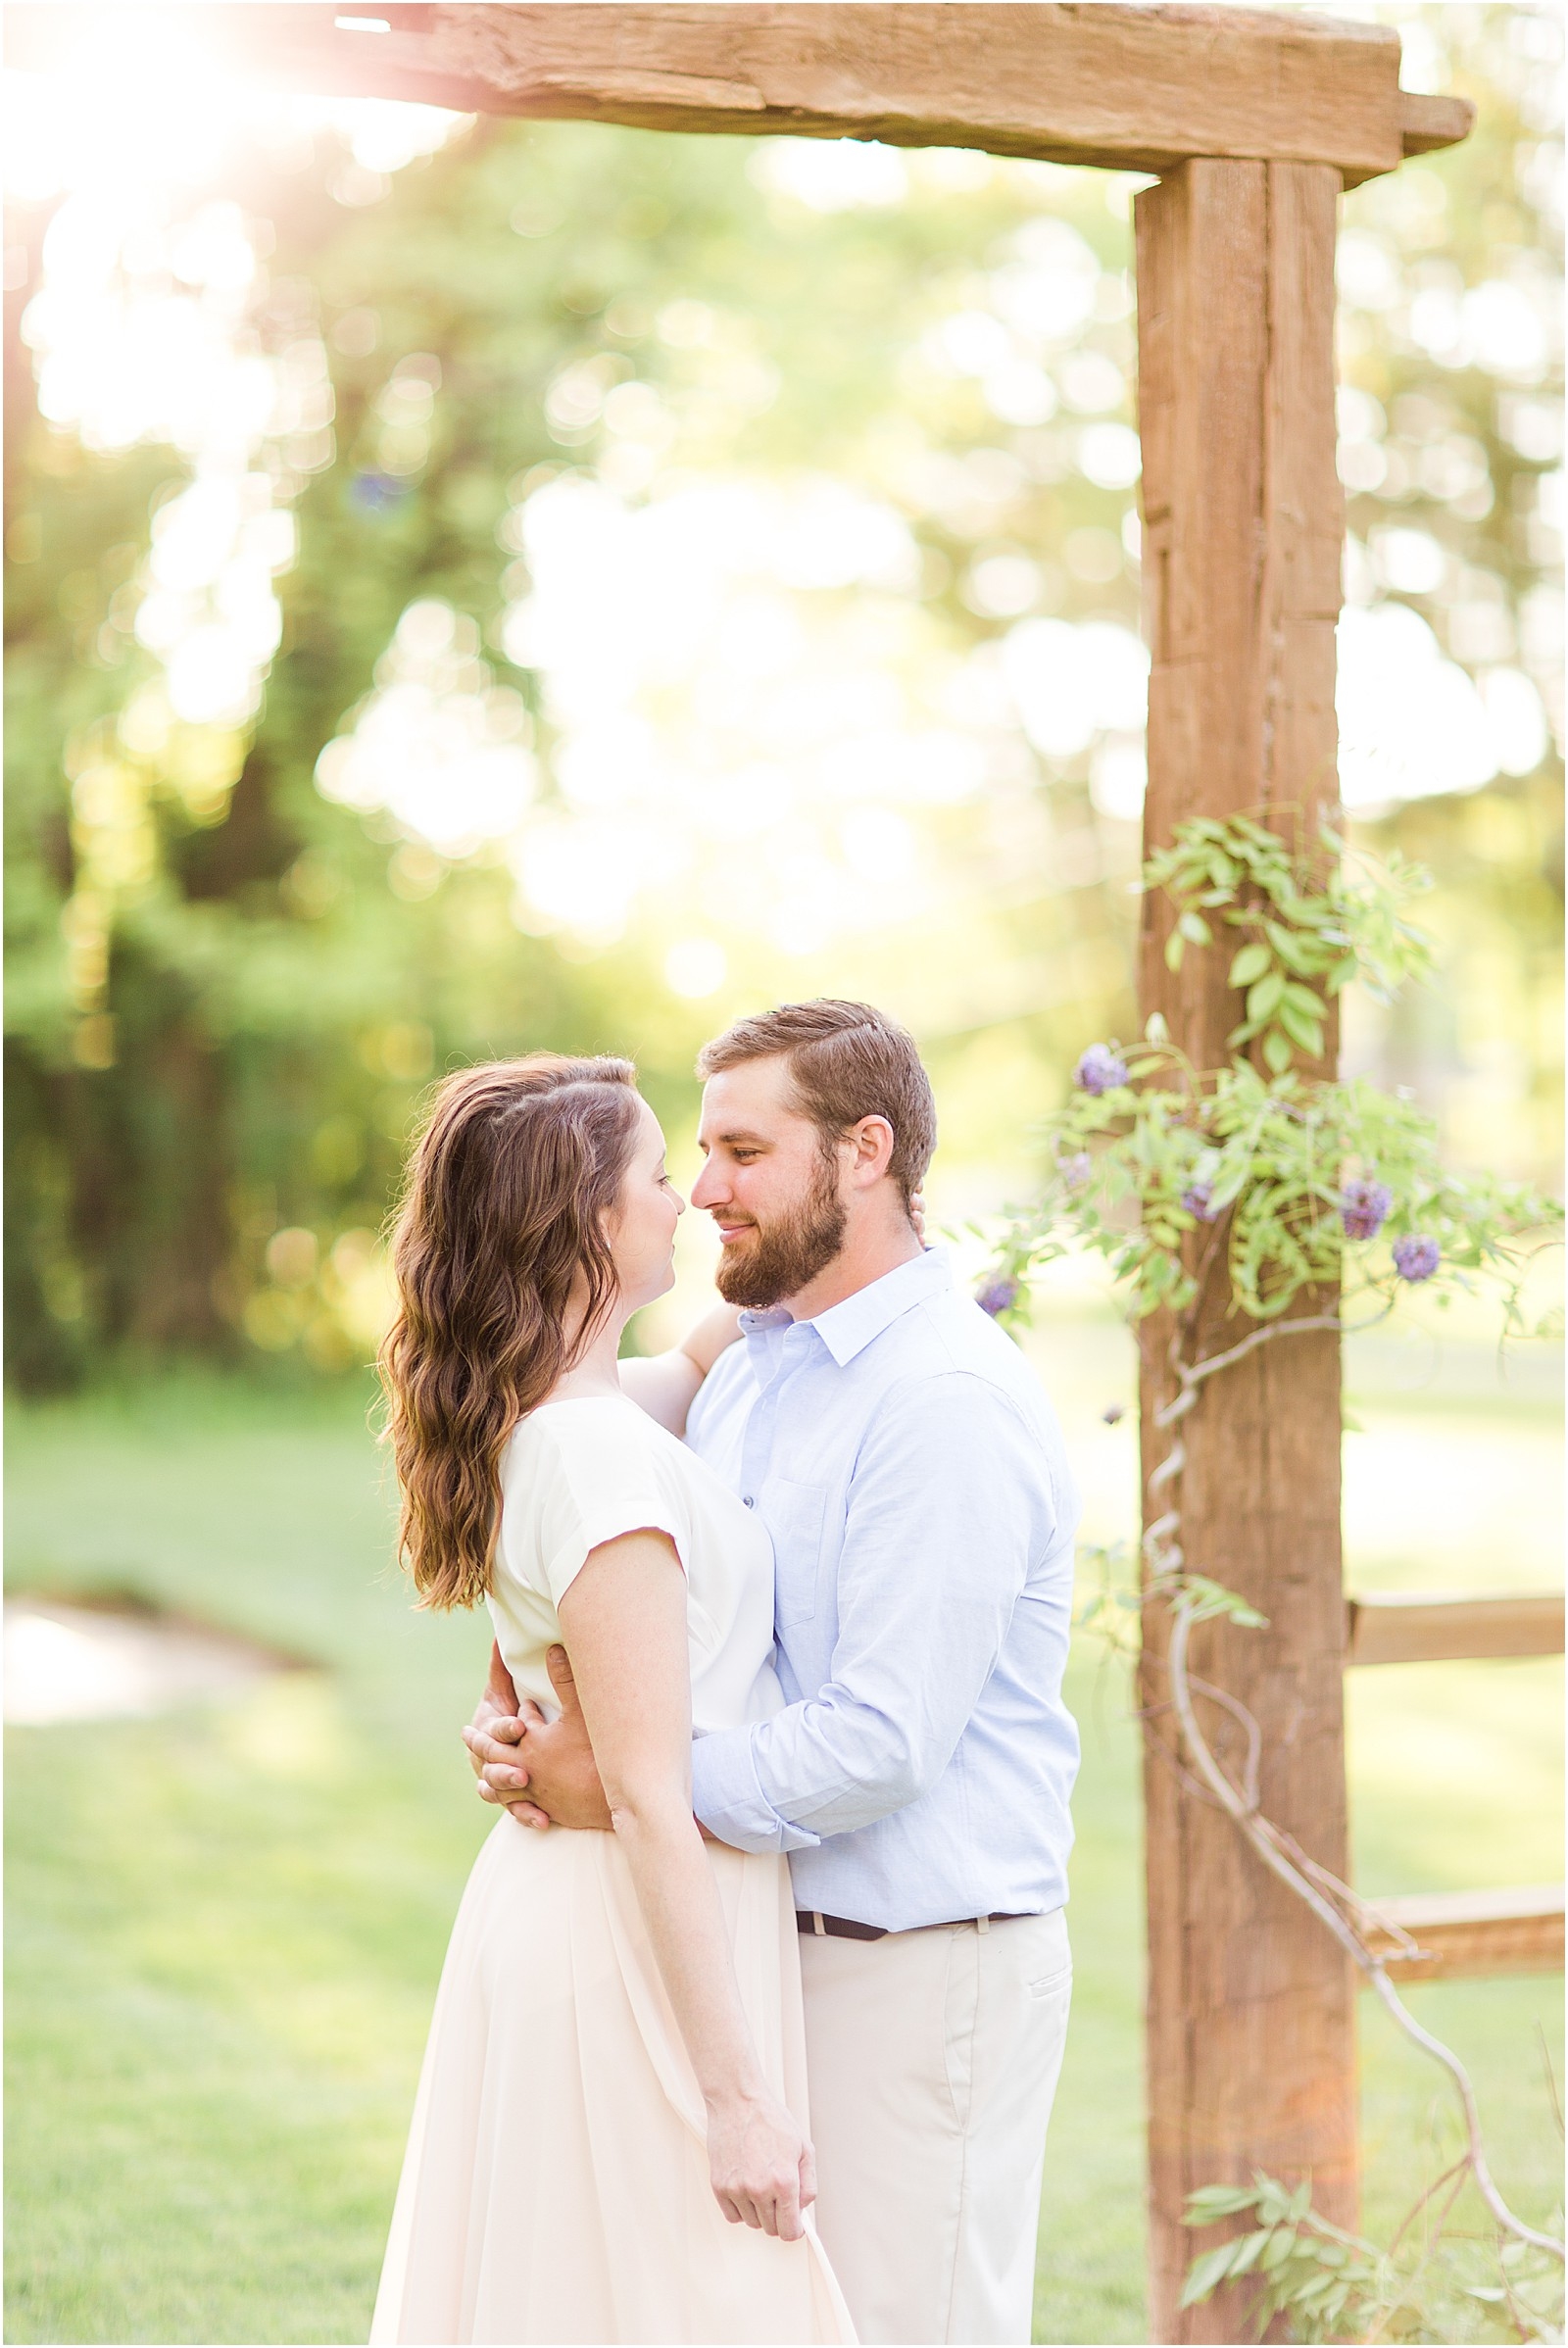 Bailey and Ben | Evansville Engagement Session | Bret and Brandie 014.jpg